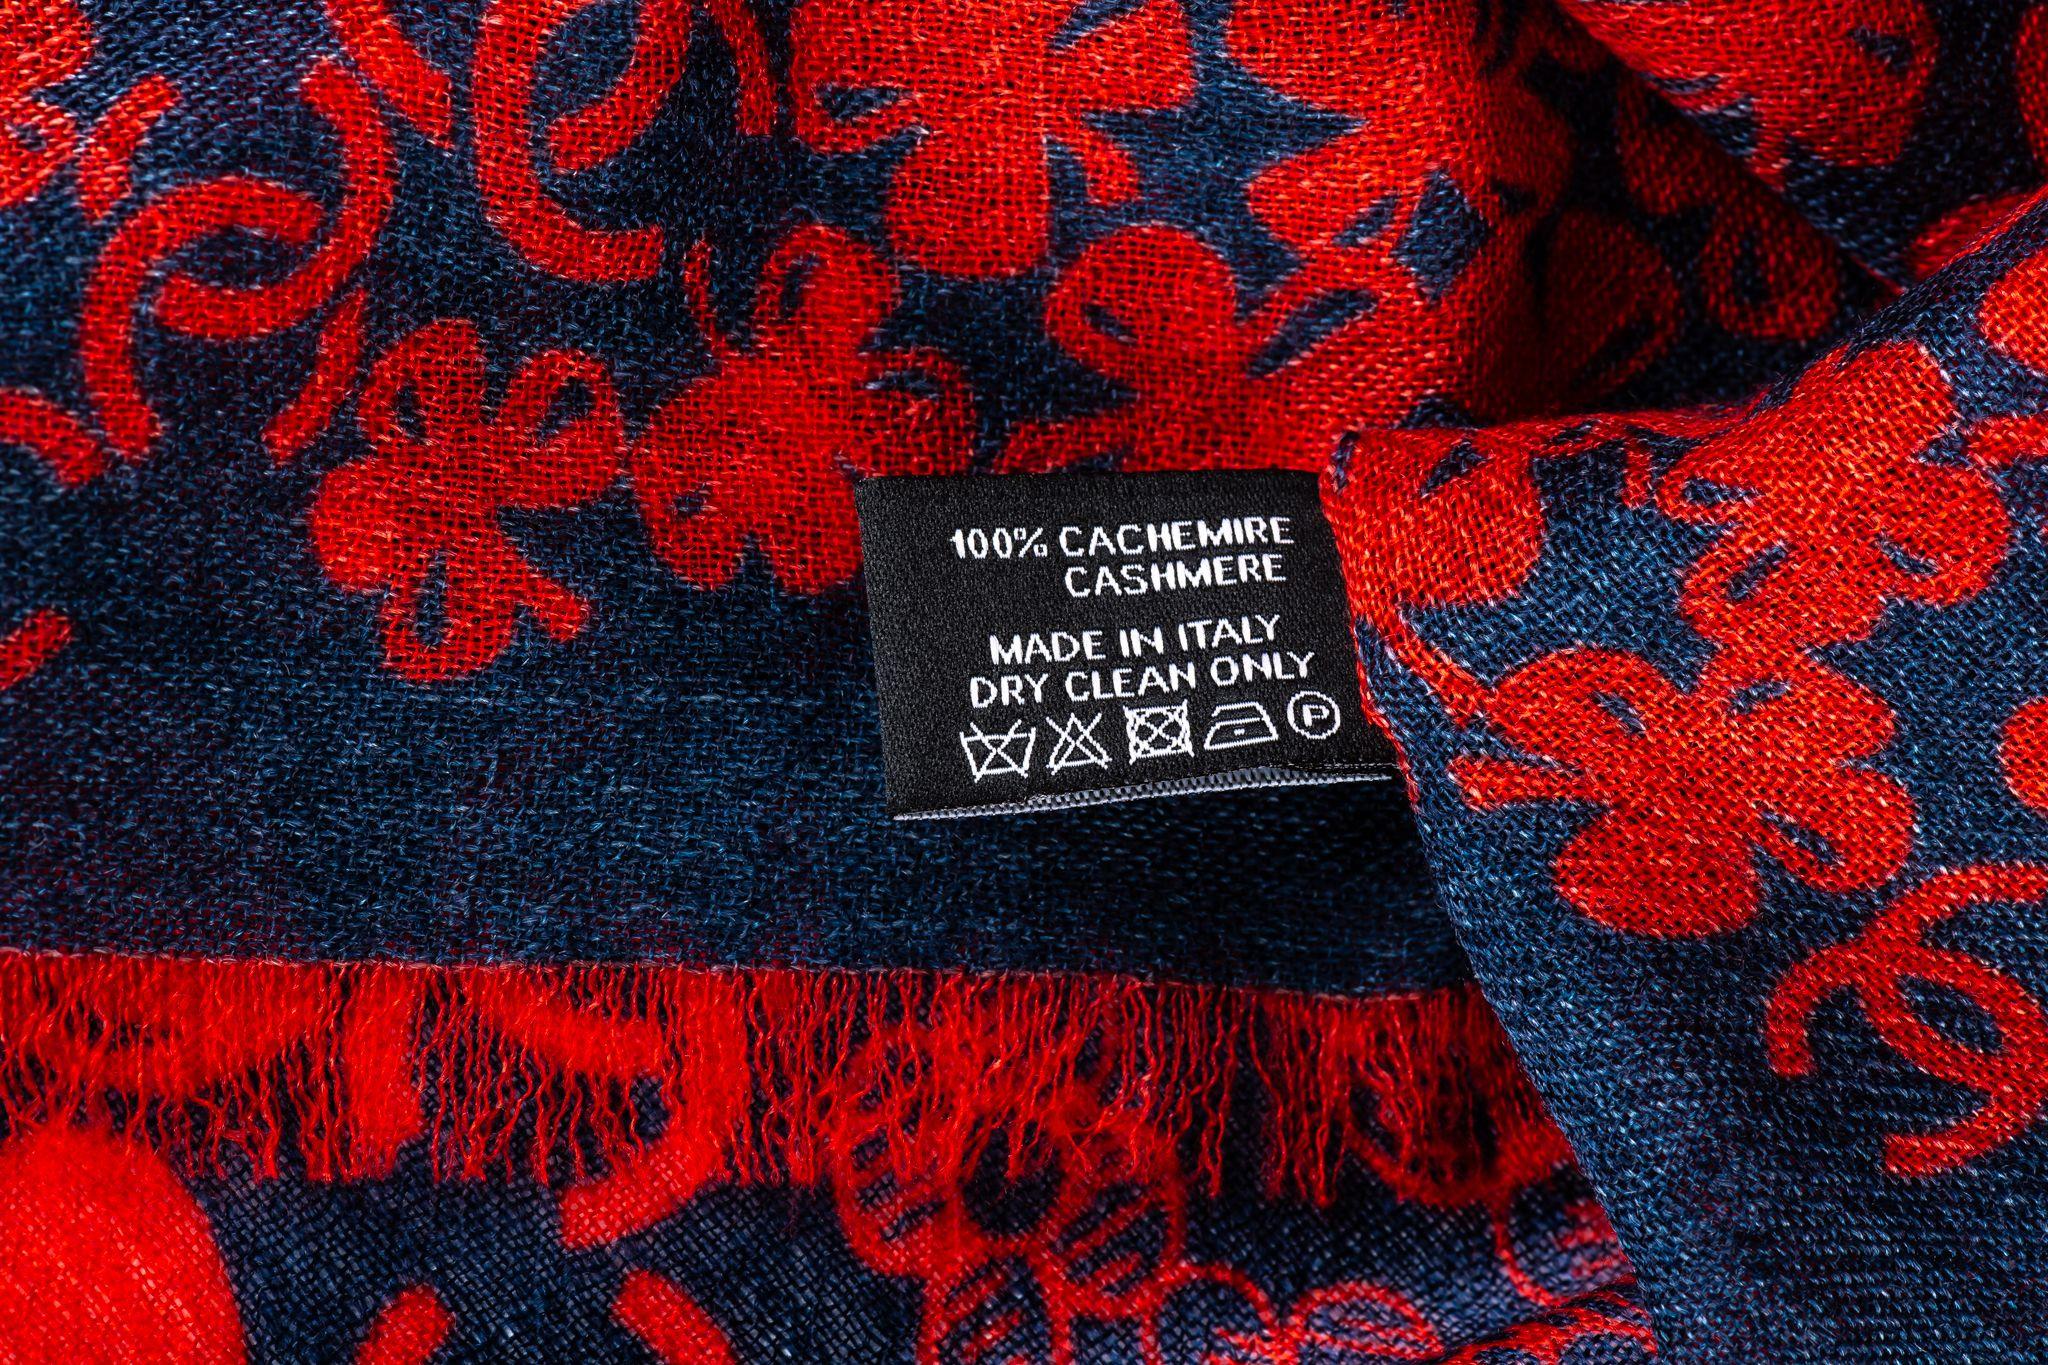 Chanel new navy and red cashmere shawl. Clover and multi logo design. Care tag attached.